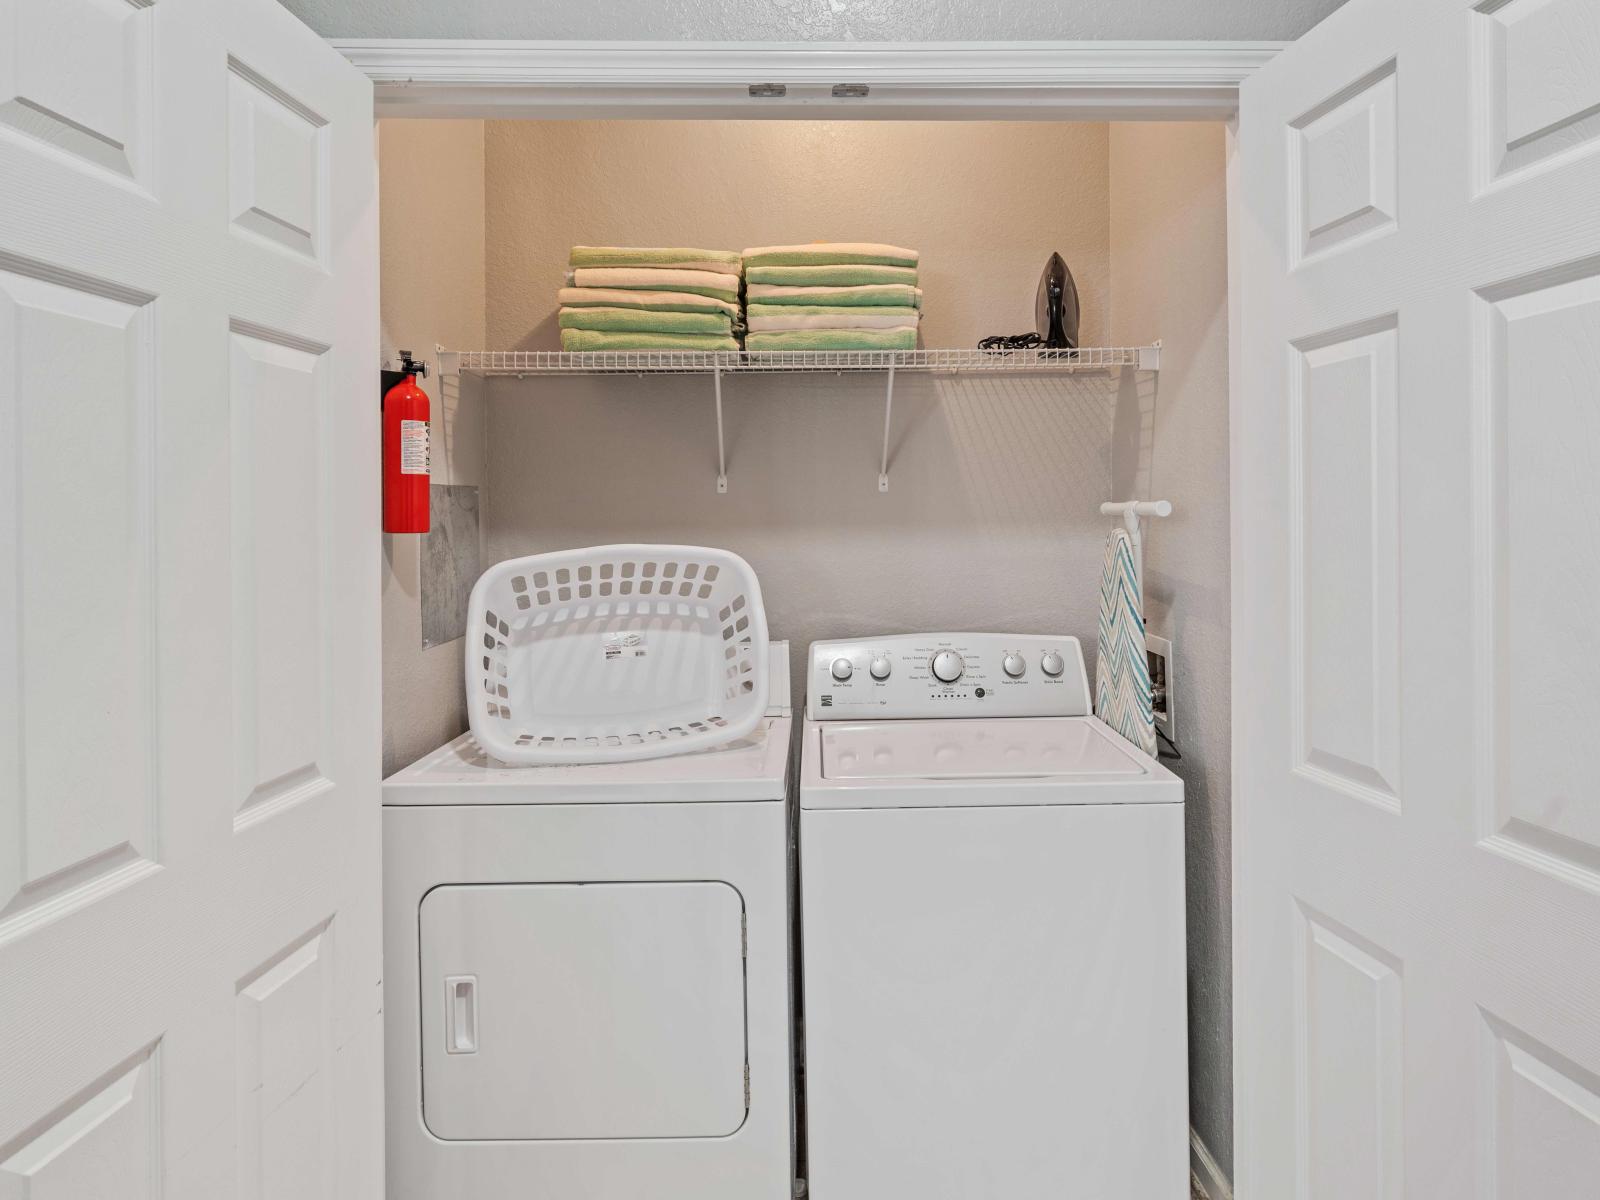 Laundry room with full washer and dryer